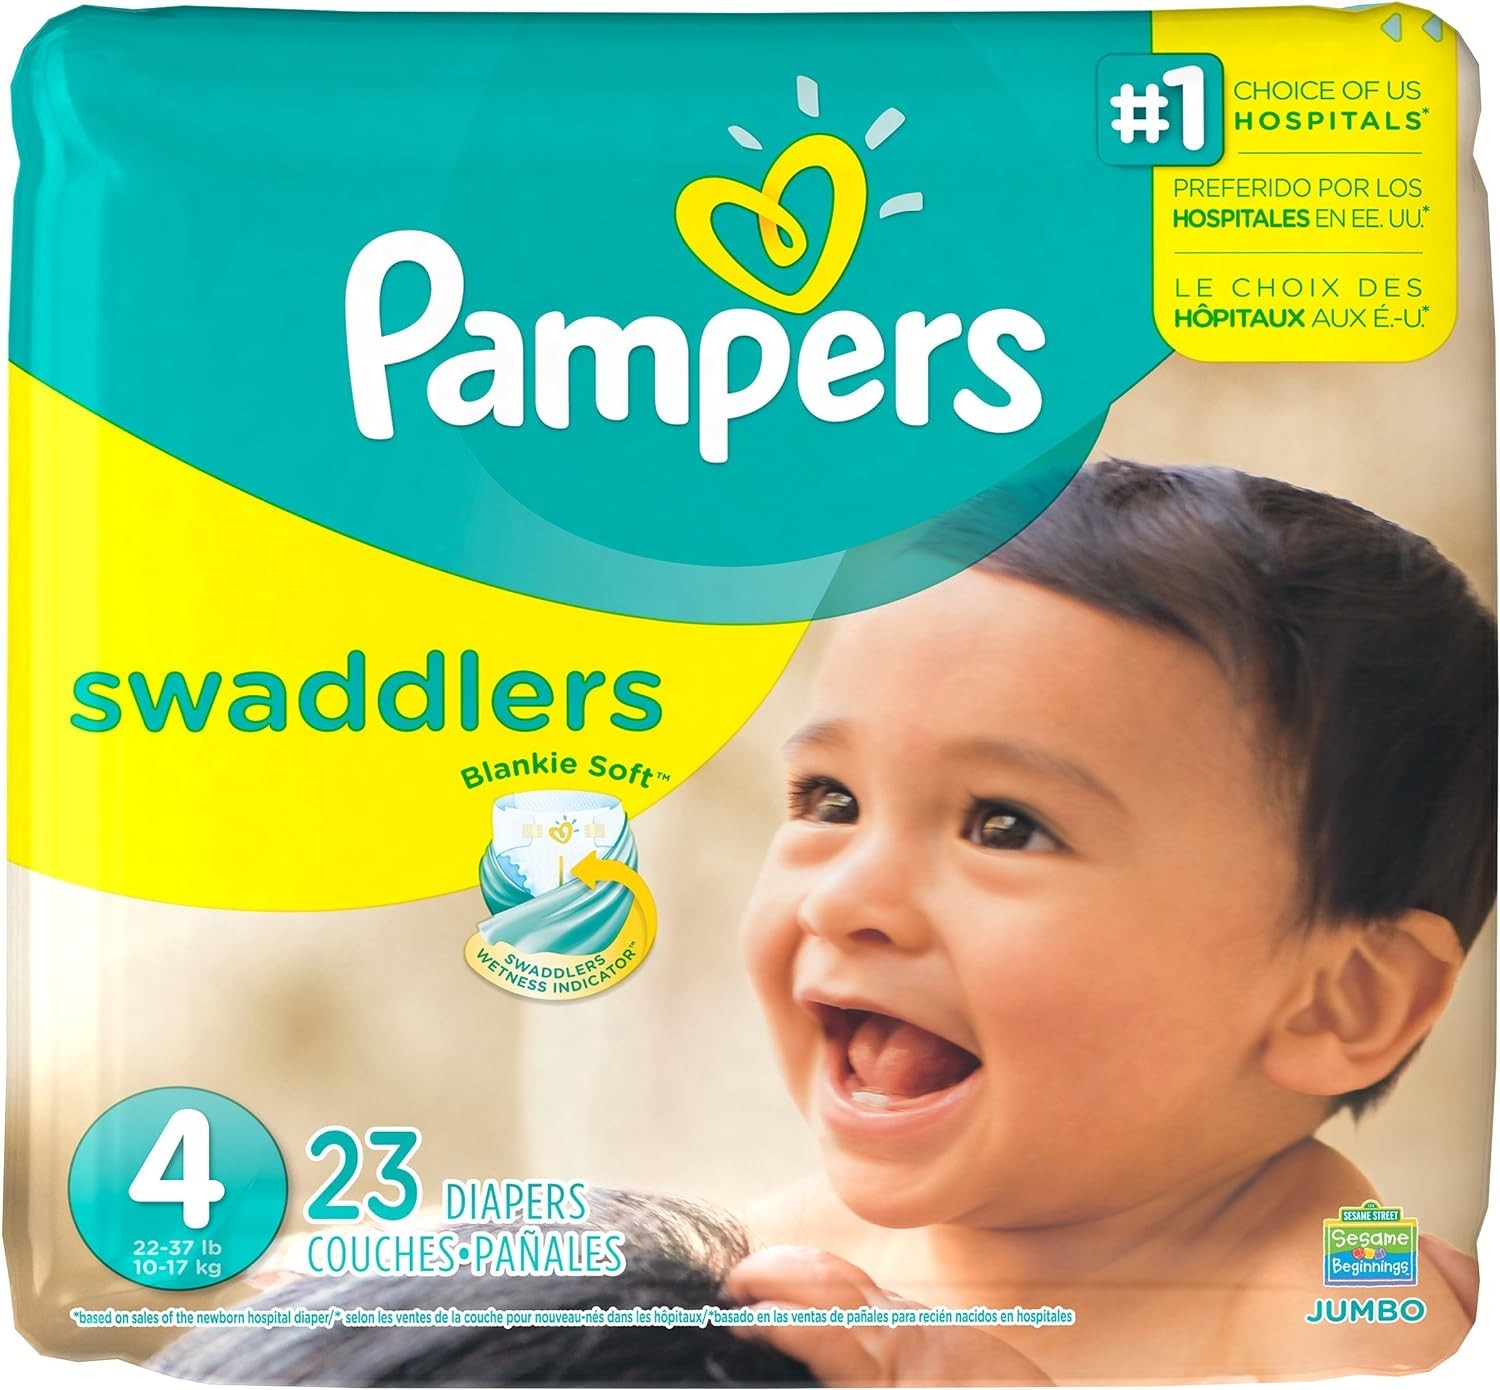 Diapers Size 4, 23 Count - Pampers Swaddlers Disposable Baby Diapers (Packaging & Prints May Vary)